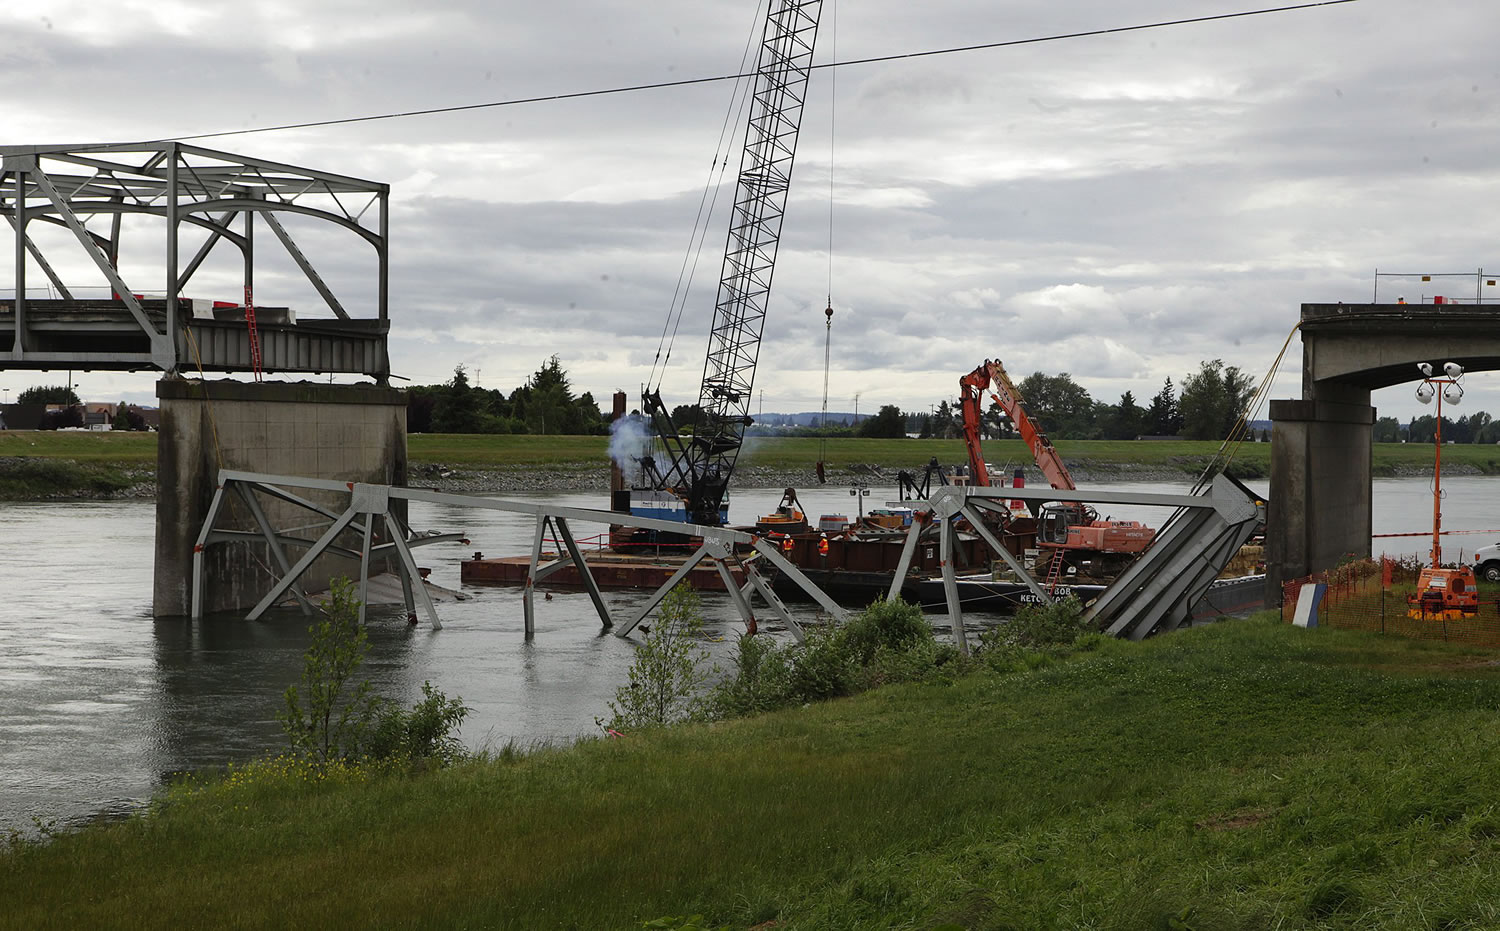 Construction workers wait as divers check out the deck of the bridge down below the water Tuesday in Mount Vernon, figuring out the way to break it up following the collapse of a section of the I-5 bridge over the Skagit River last week.